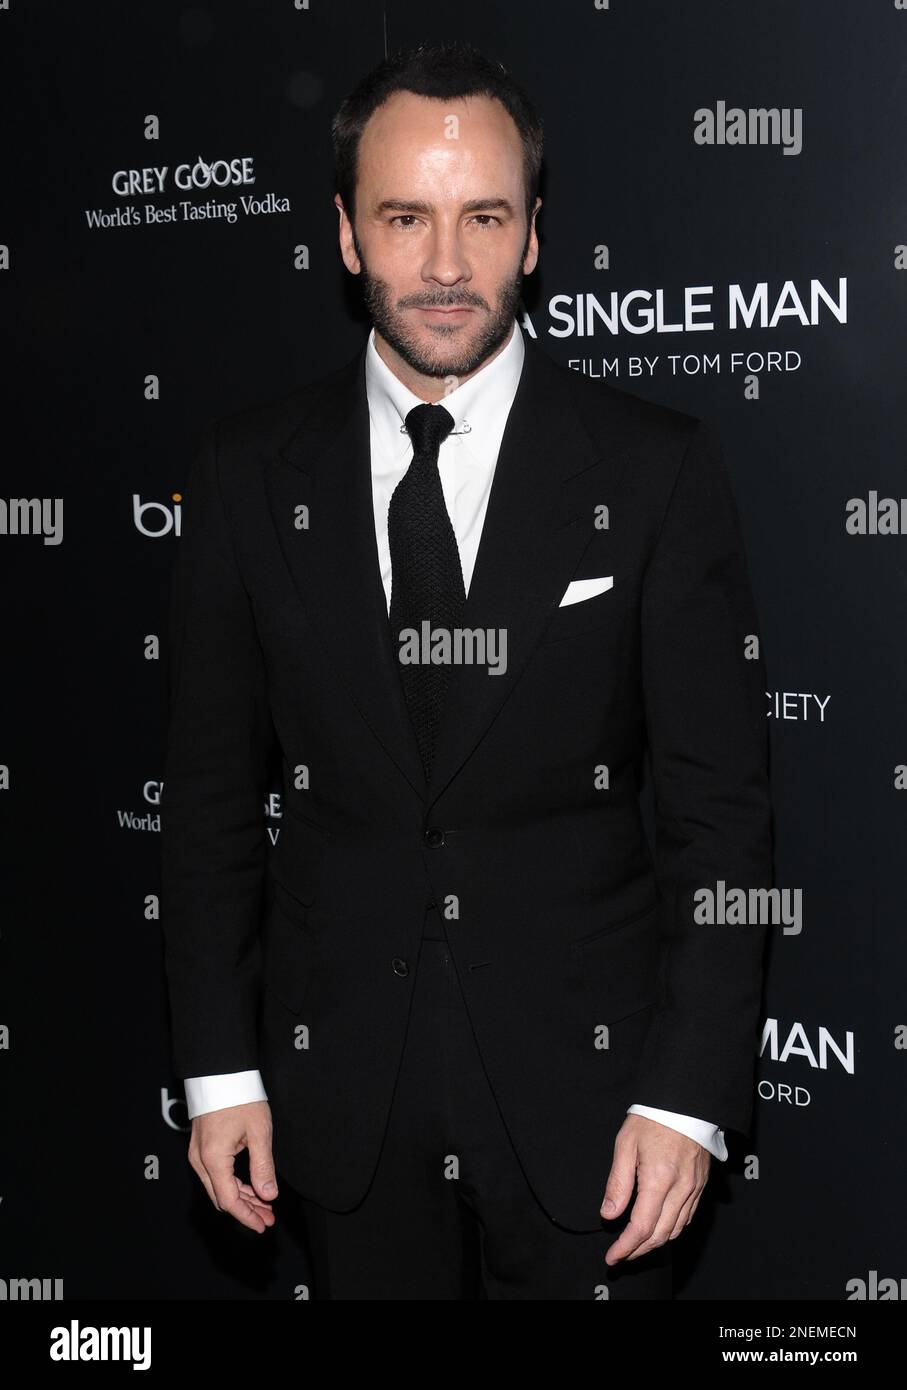 Writer-director Tom Ford attends a special screening of 'A Single Man'  hosted by The Cinema Society and BING at The Museum of Modern Art on  Sunday, Dec. 6, 2009 in New York. (